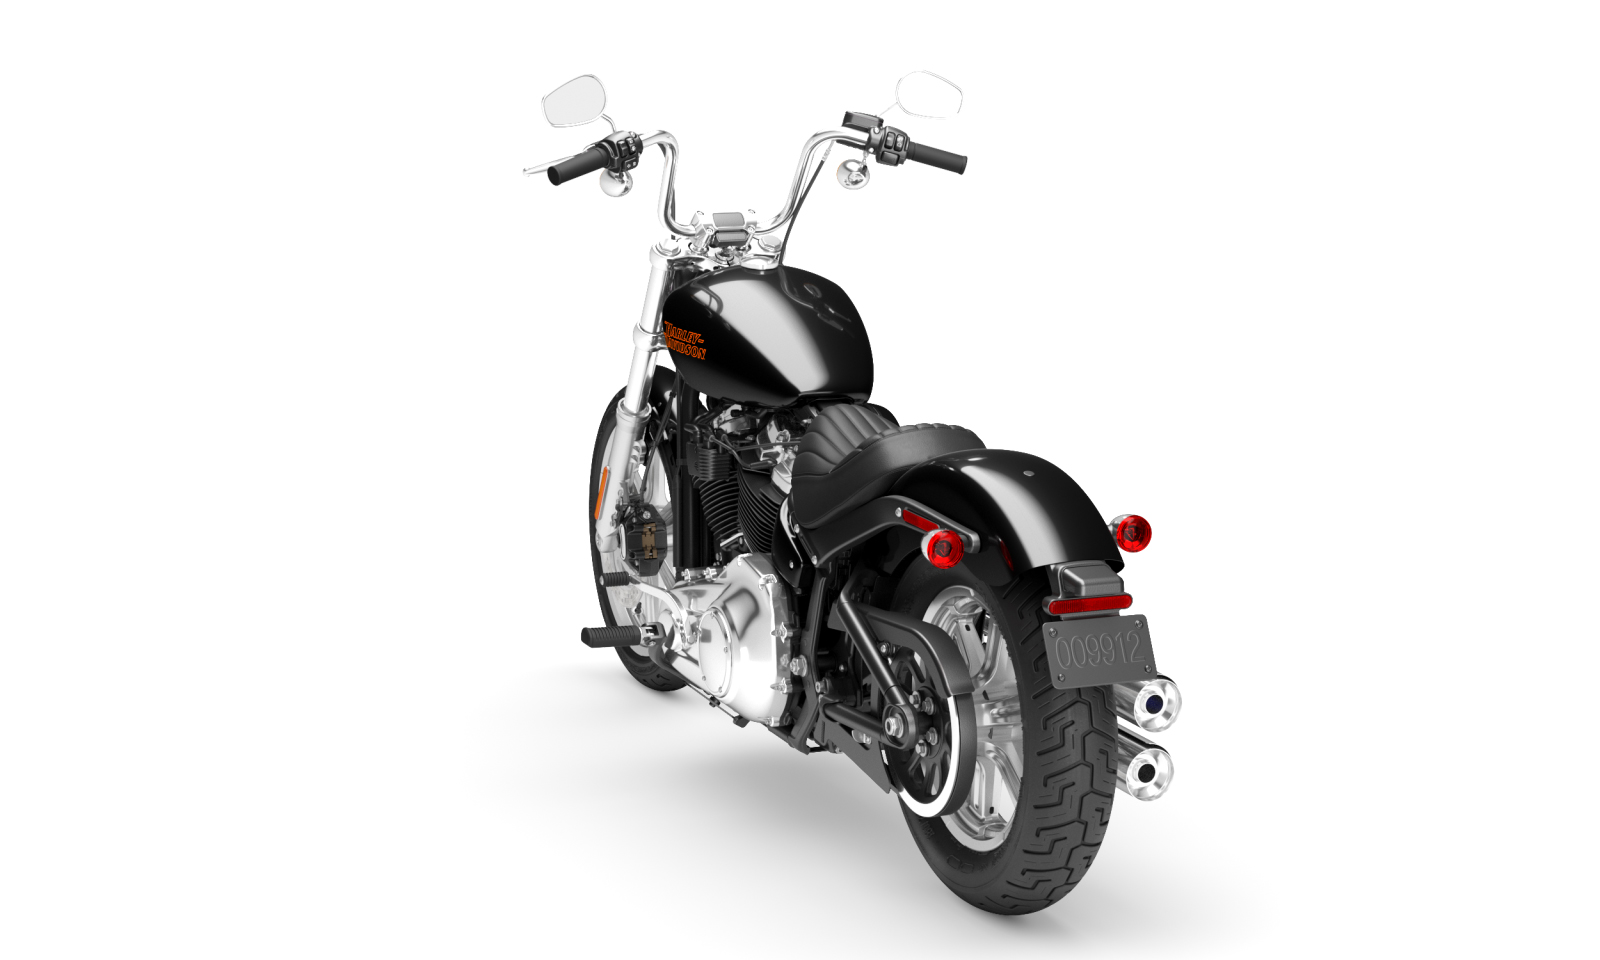 Harley Davidson Softail Price Specs Mileage Reviews Images